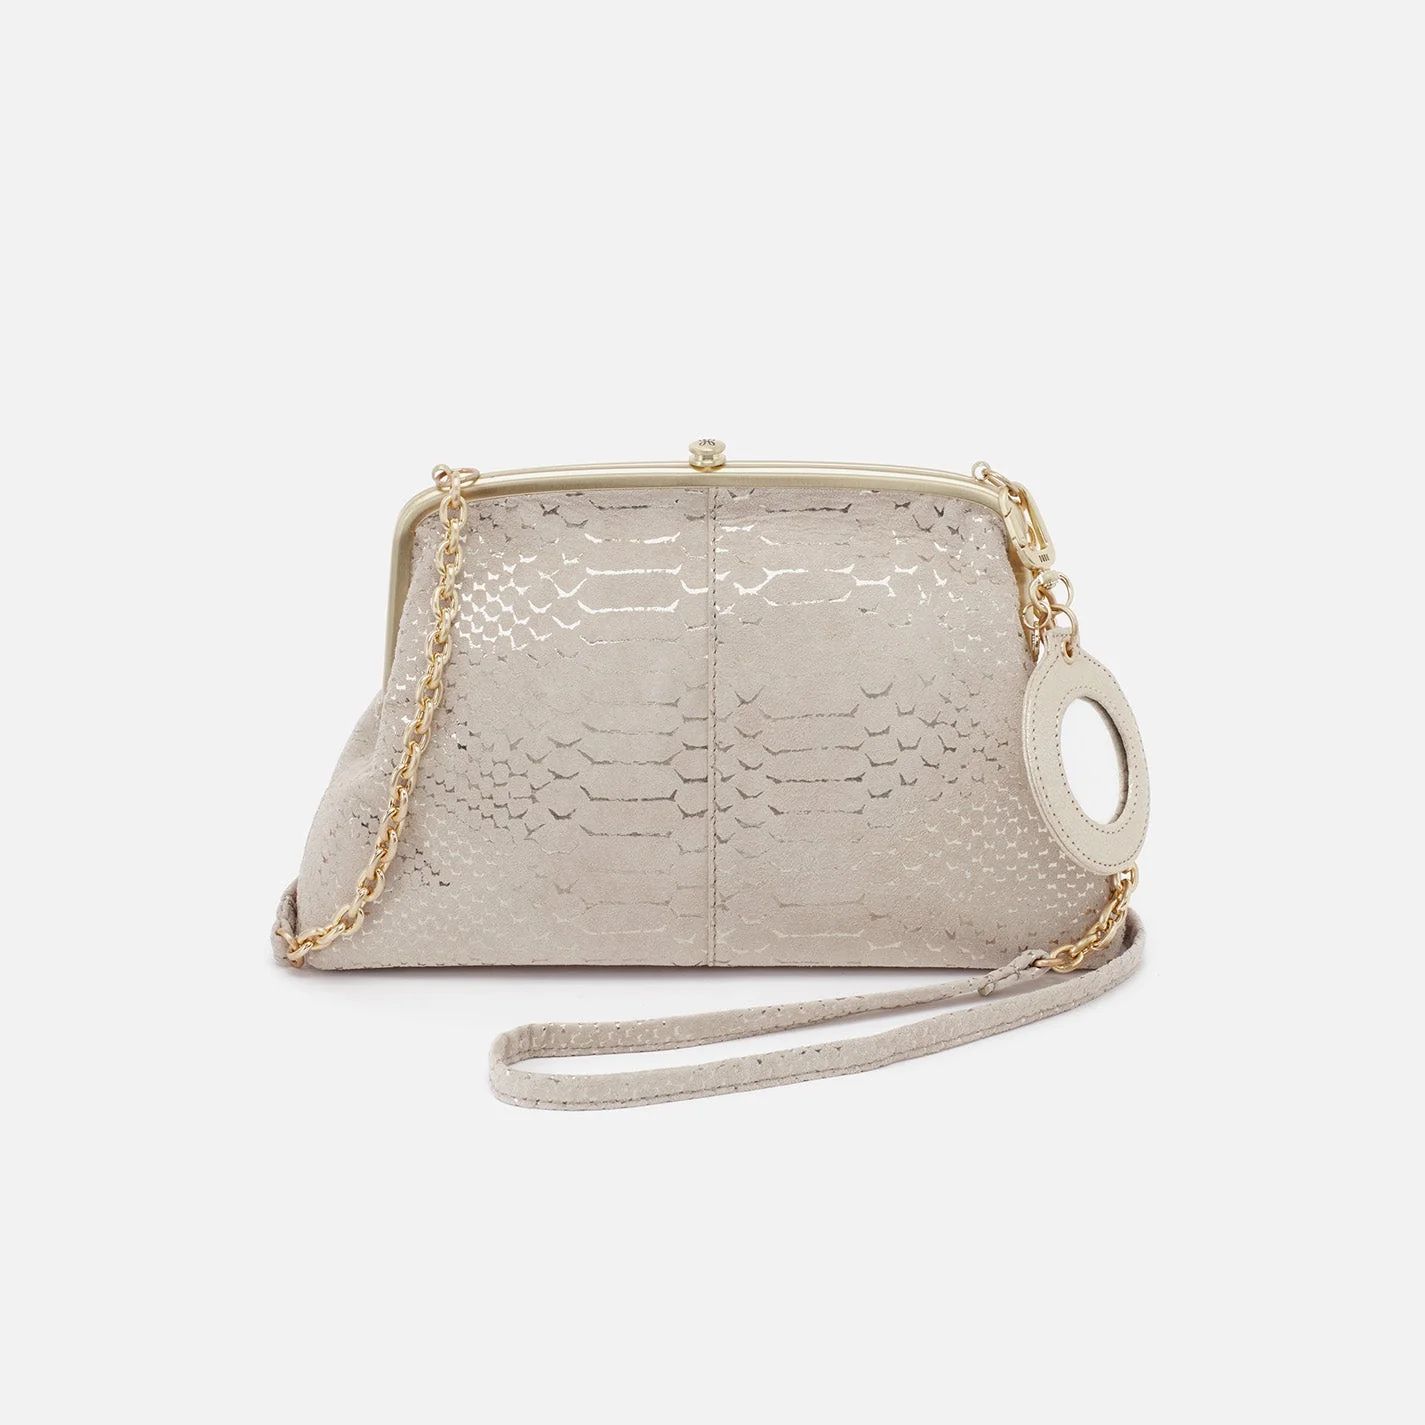 Lana + Mirror Charm Crossbody in Printed Leather - Gold Filigree Exotic | HOBO Bags